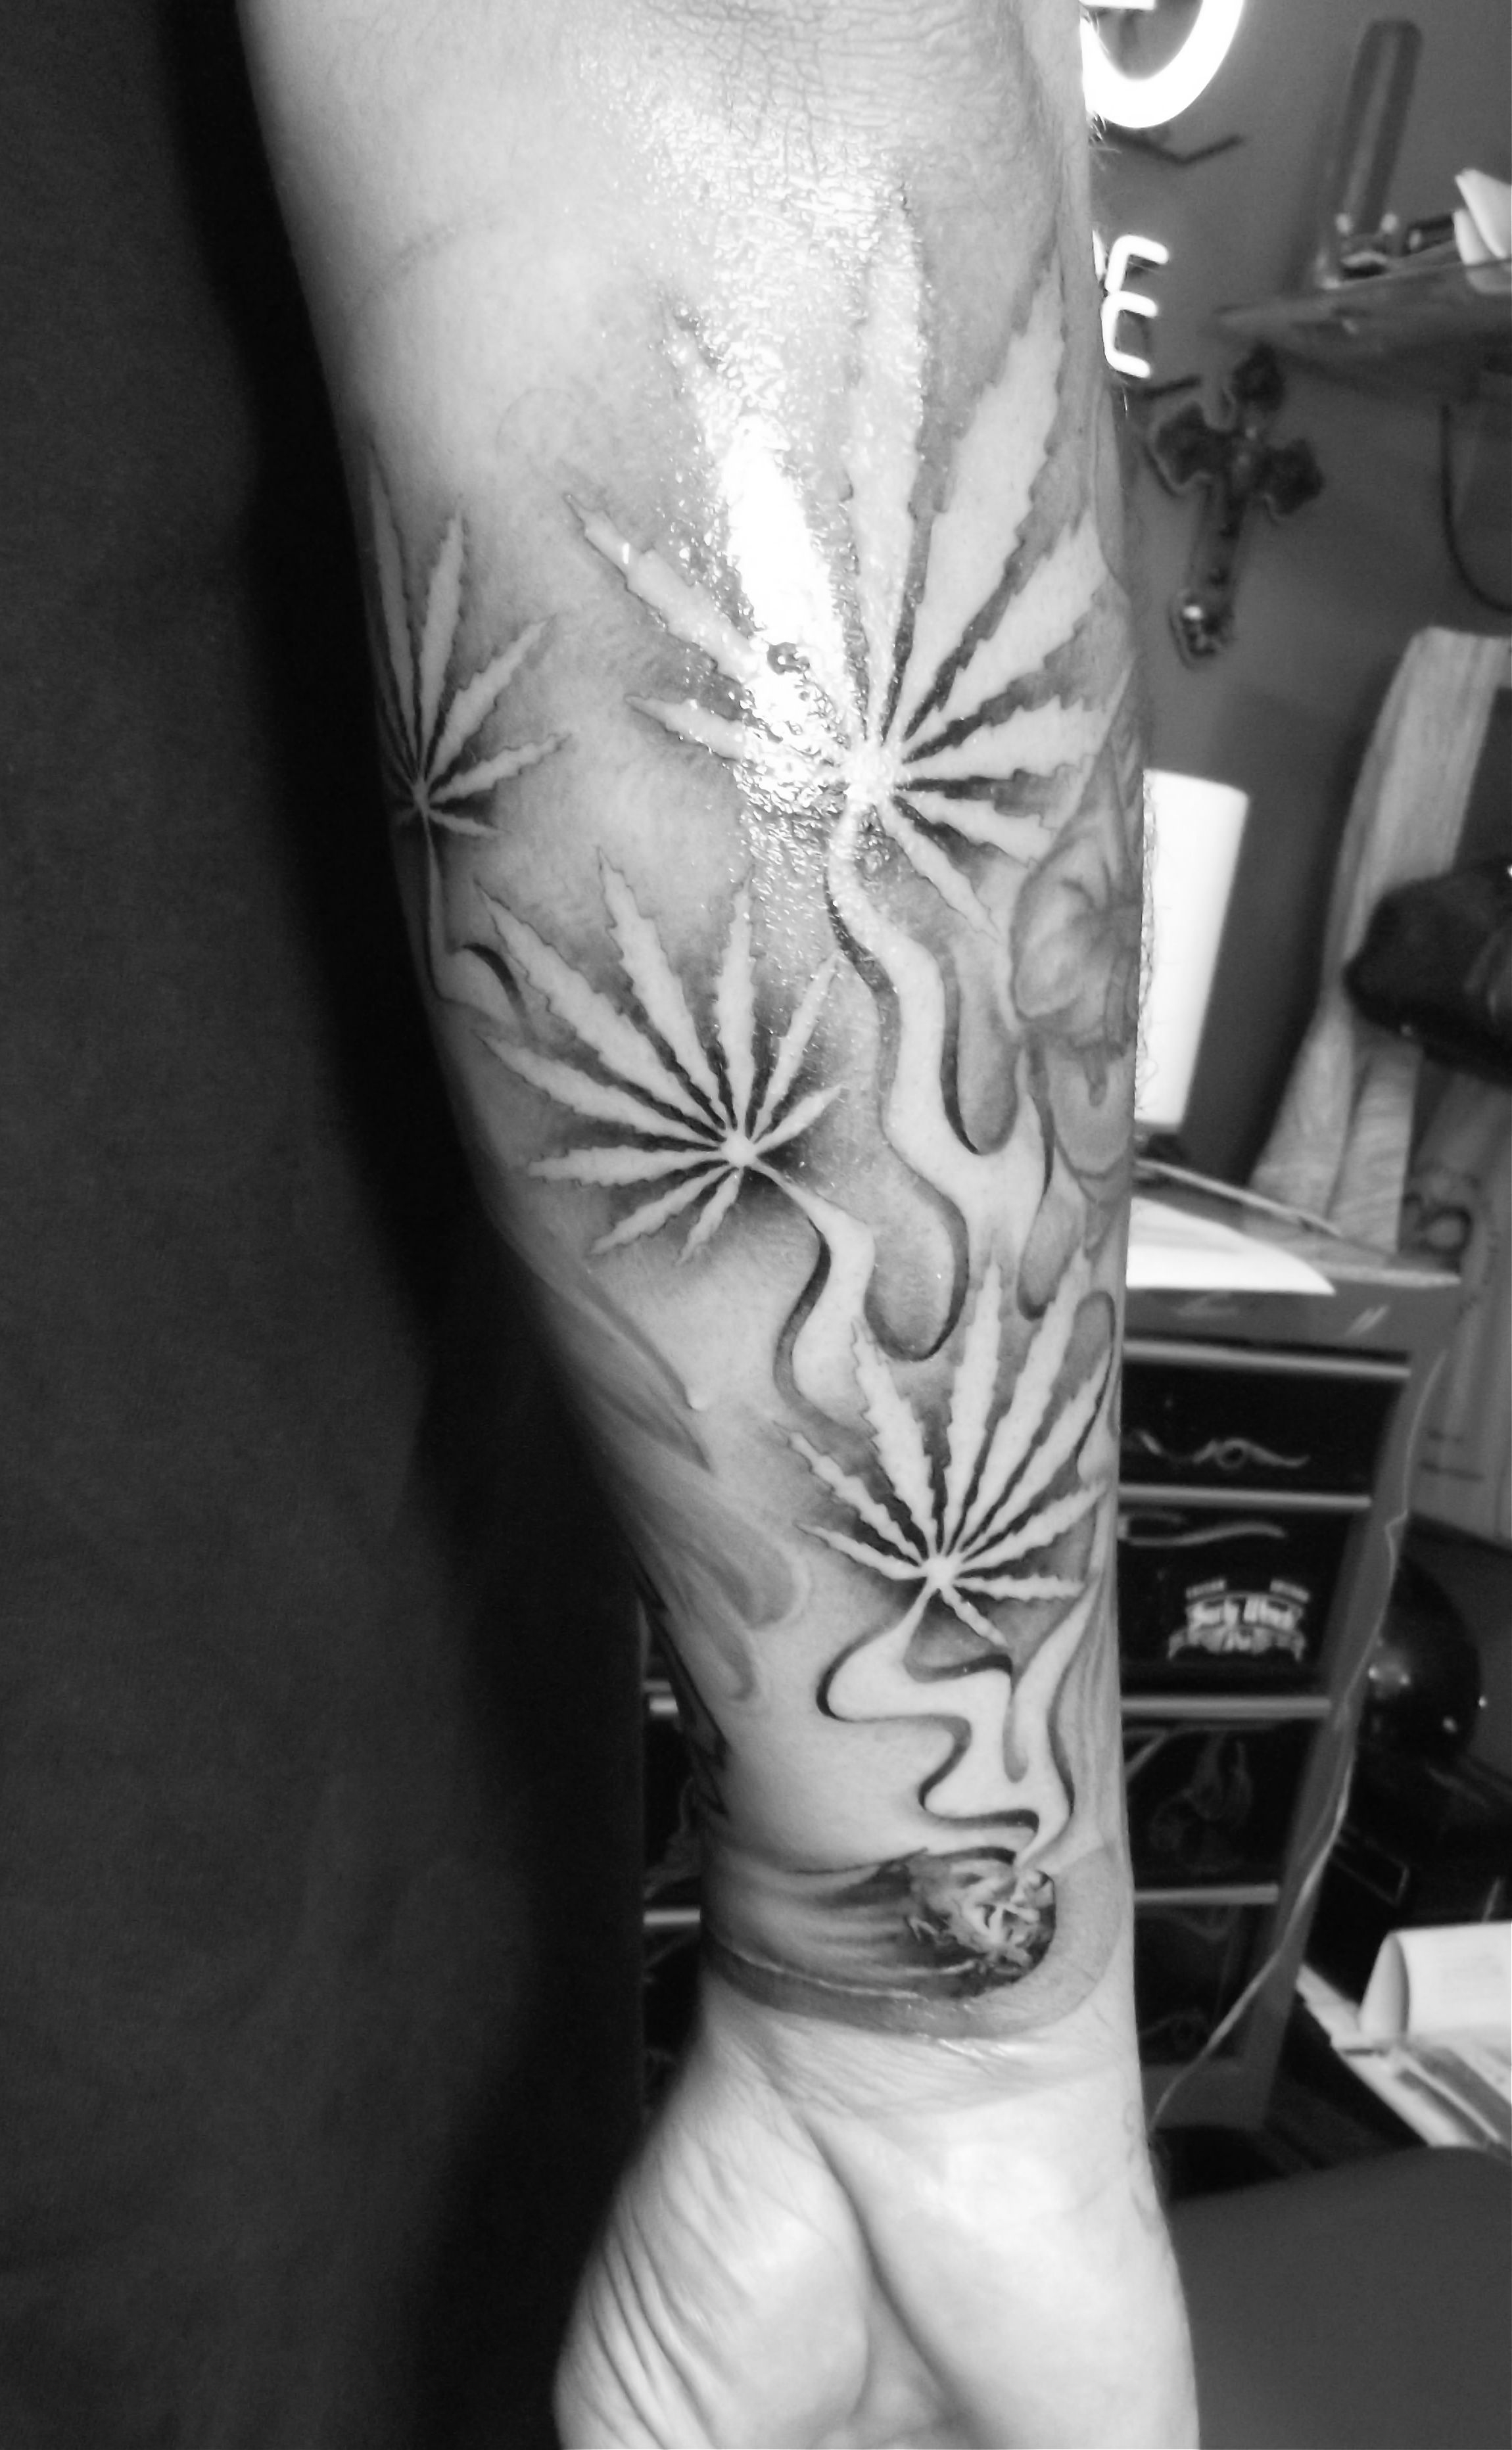 Black N White Leafs Tattoo On Lower Arm 23003727 Tattoo in proportions 2300 X 3727